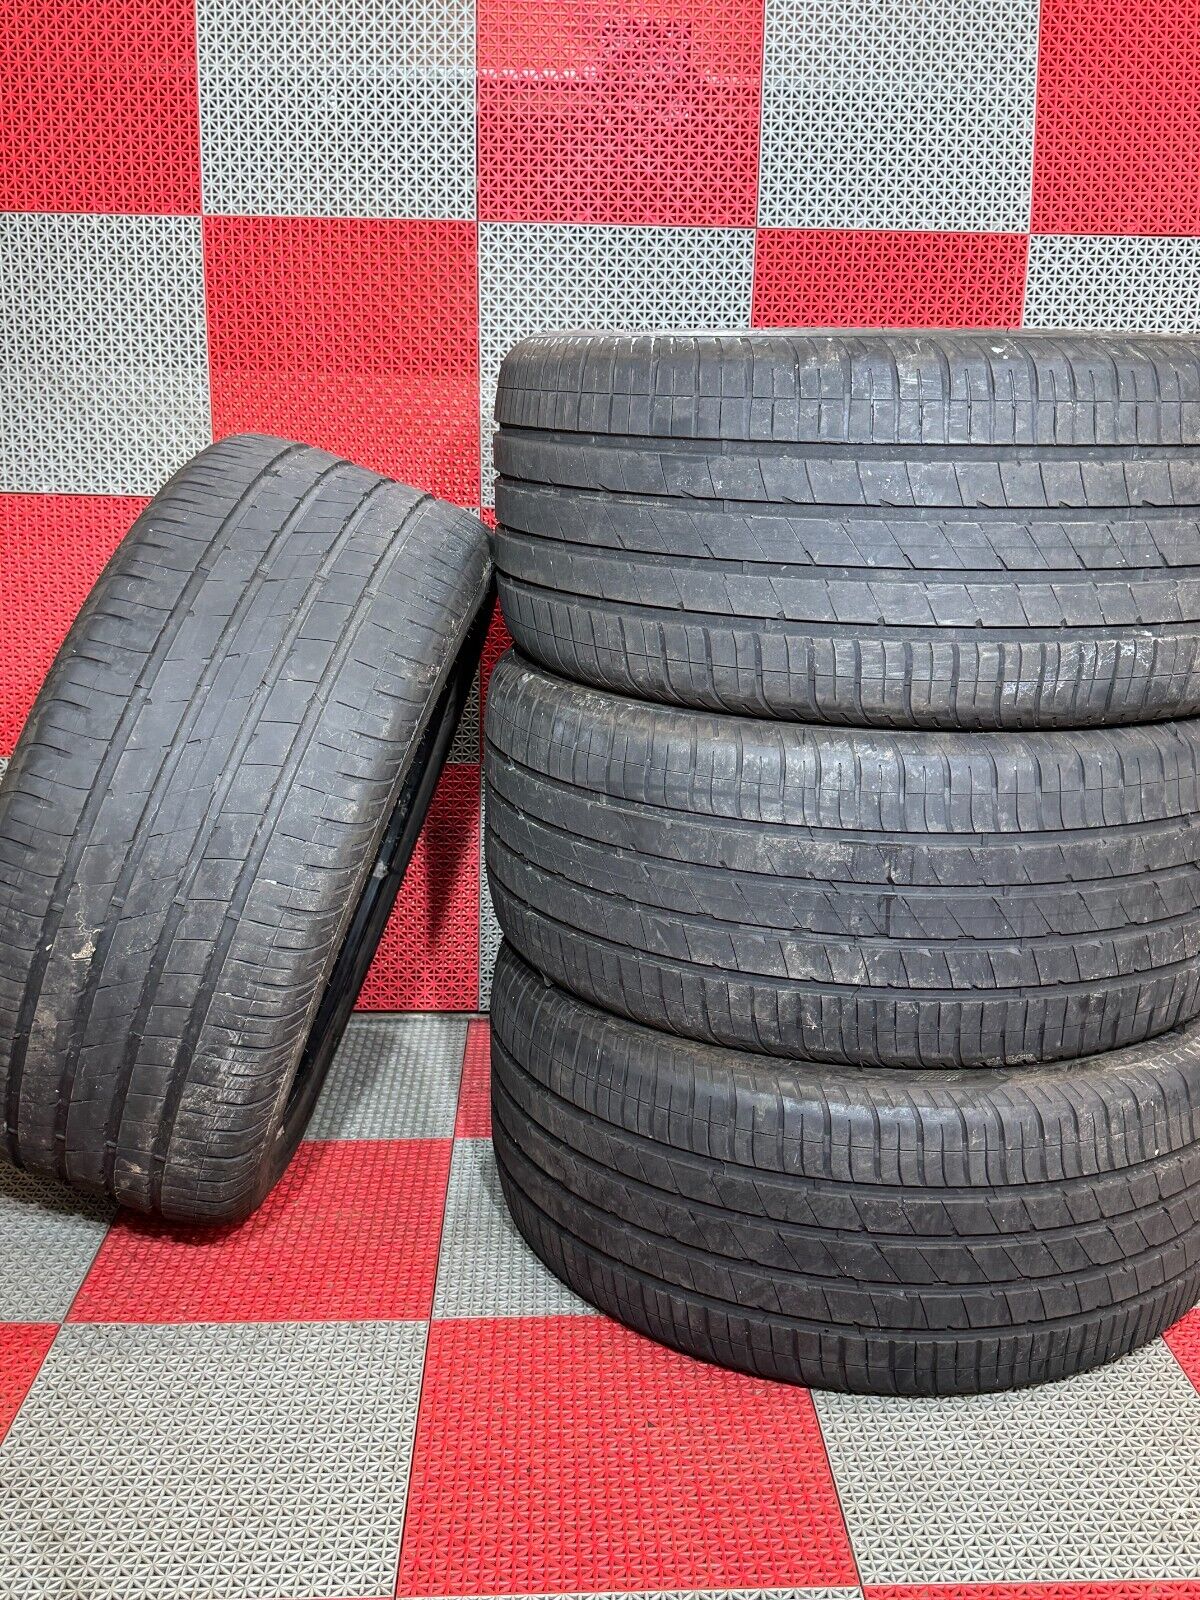 4x Used 255/40 R20 Goodyear Eagle F1 Tires 6-7/32 Tires 255/40/20